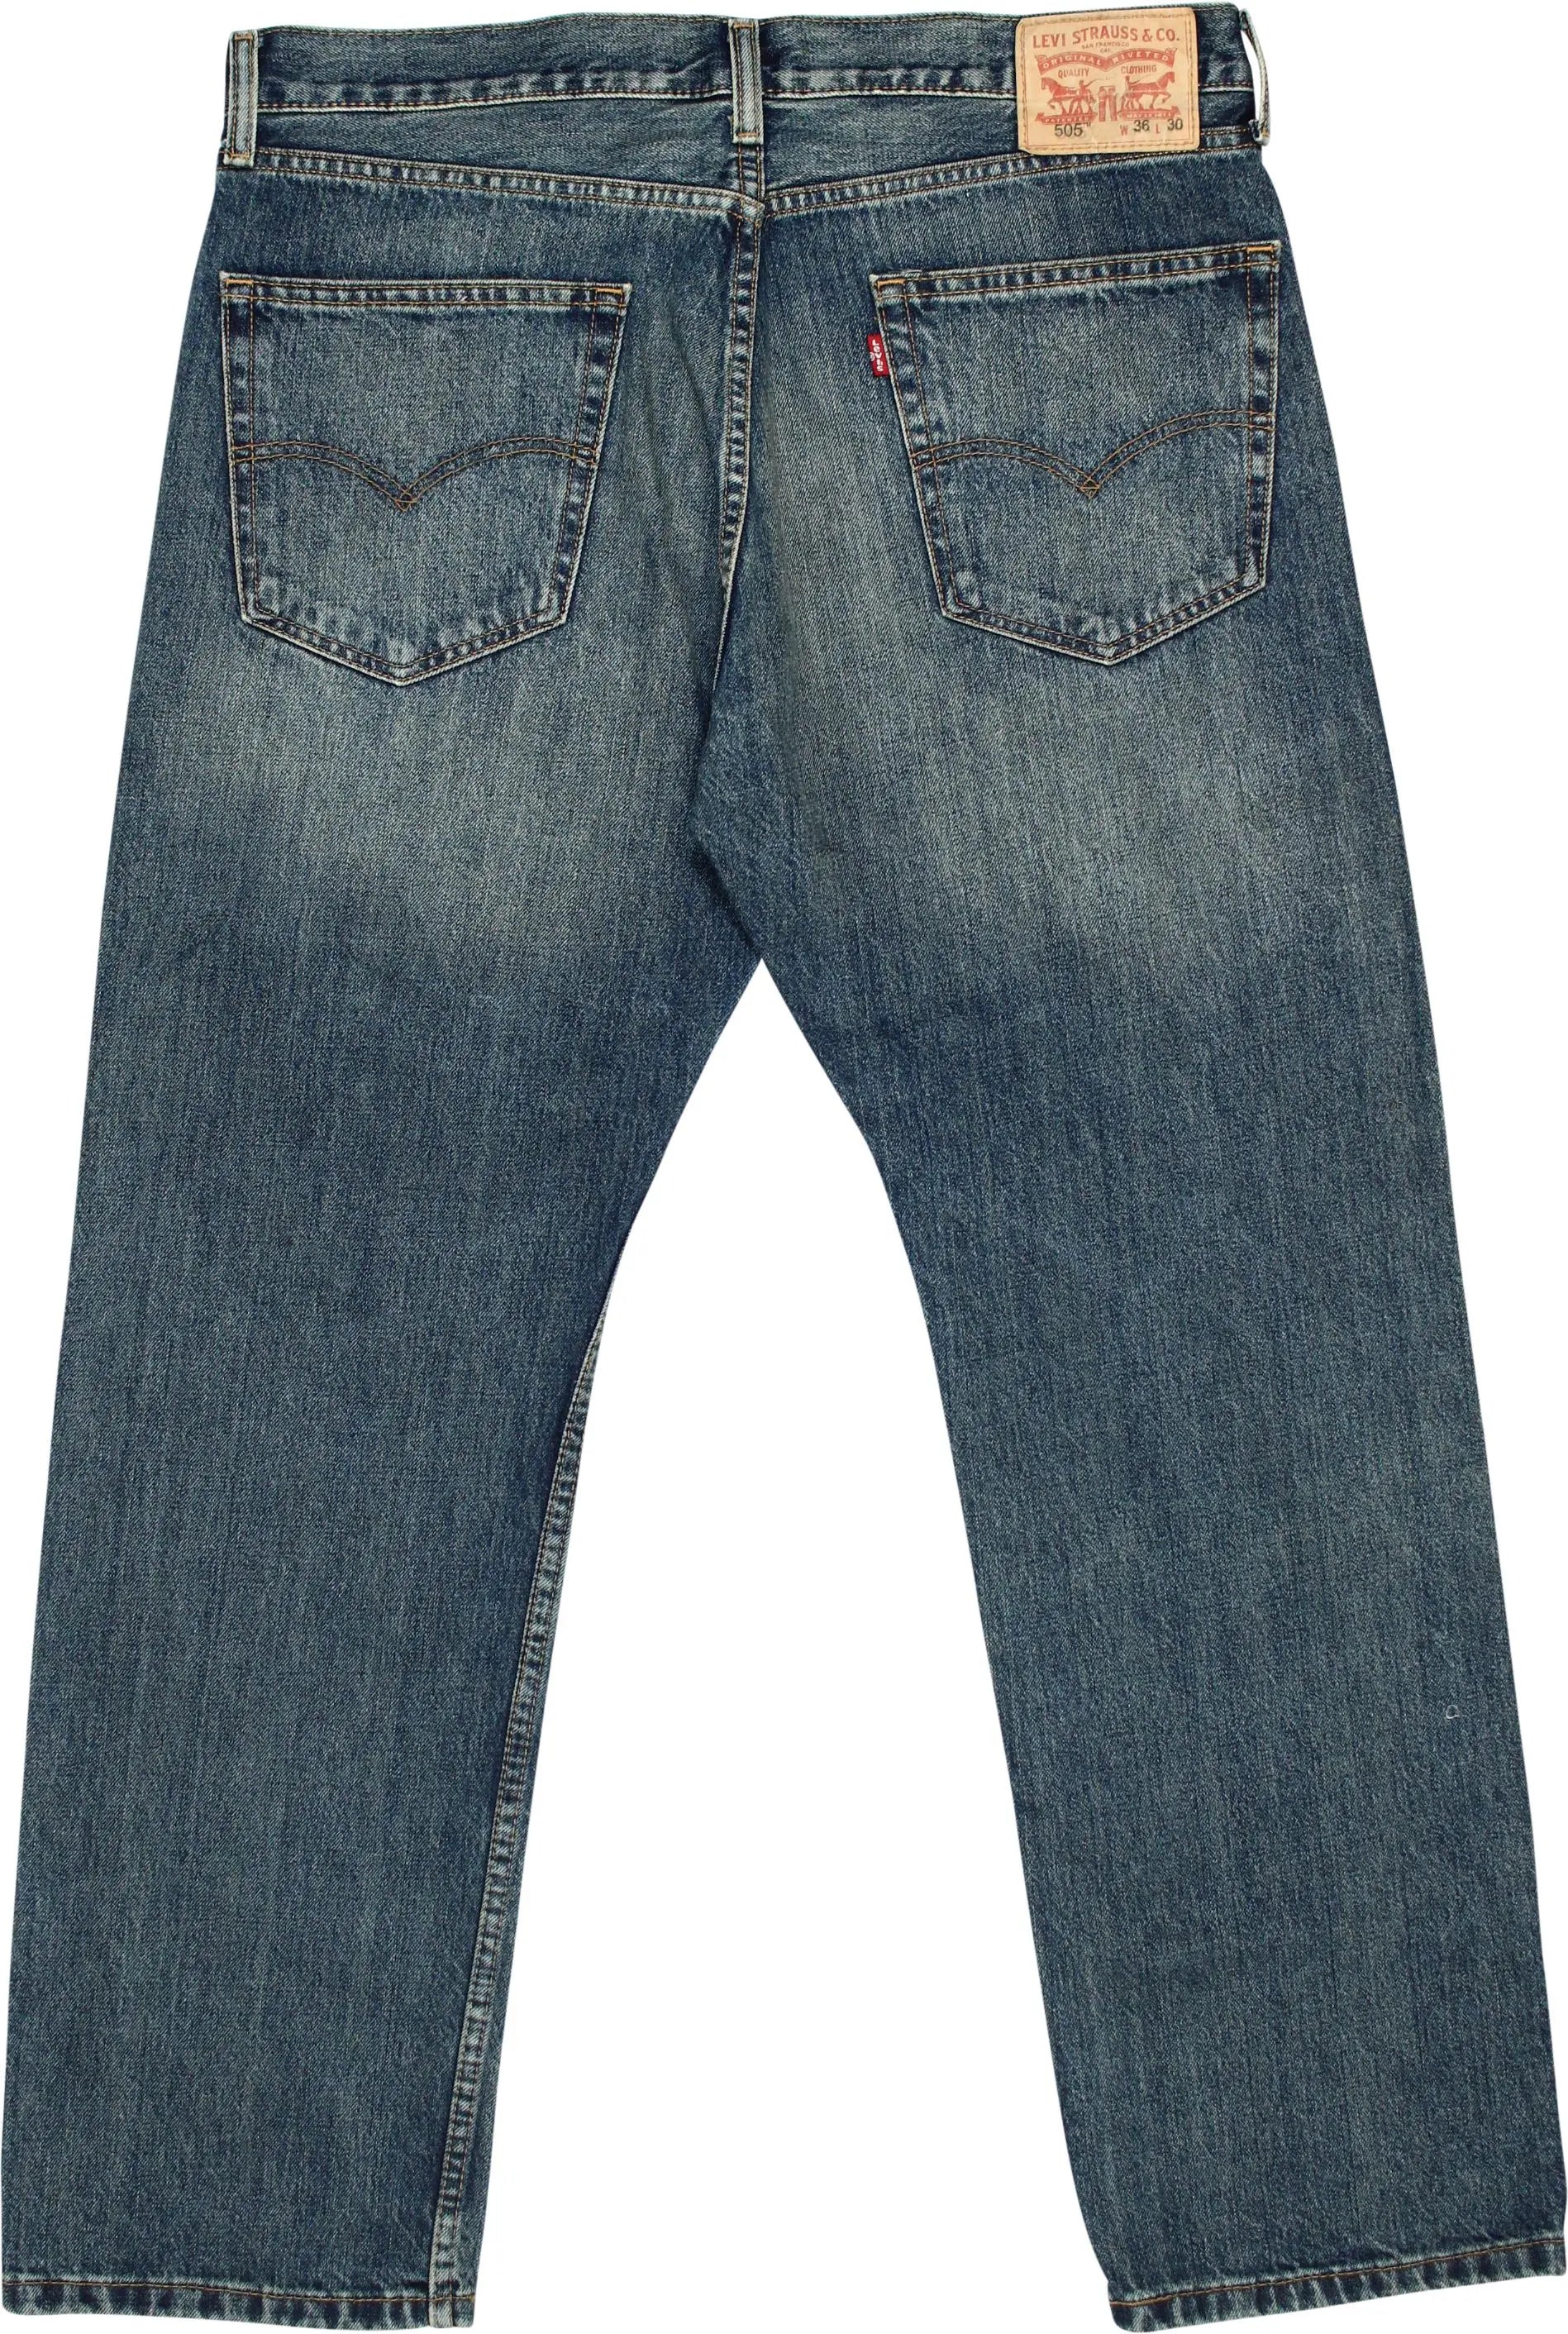 Levi's - 505 Jeans by Levi's- ThriftTale.com - Vintage and second handclothing